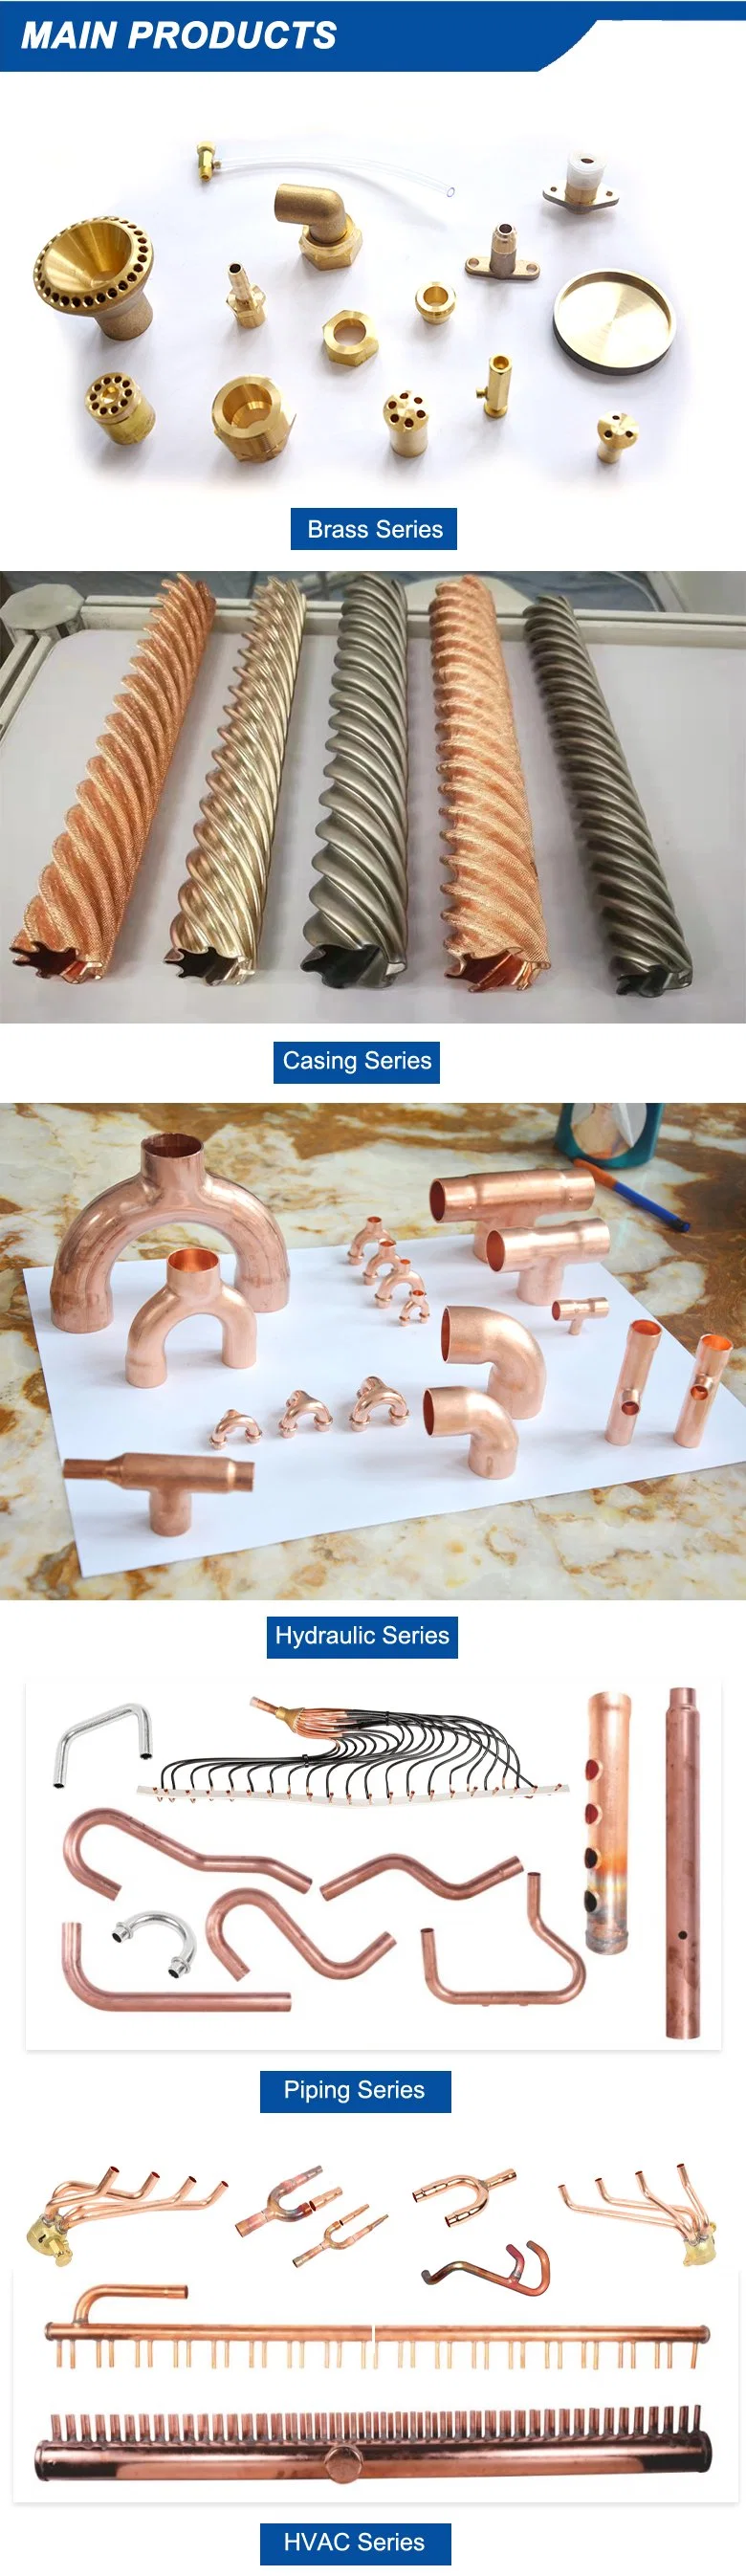 Used to Push and Connect Copper Pipe Fittings for Refrigeration Copper Press Fittings